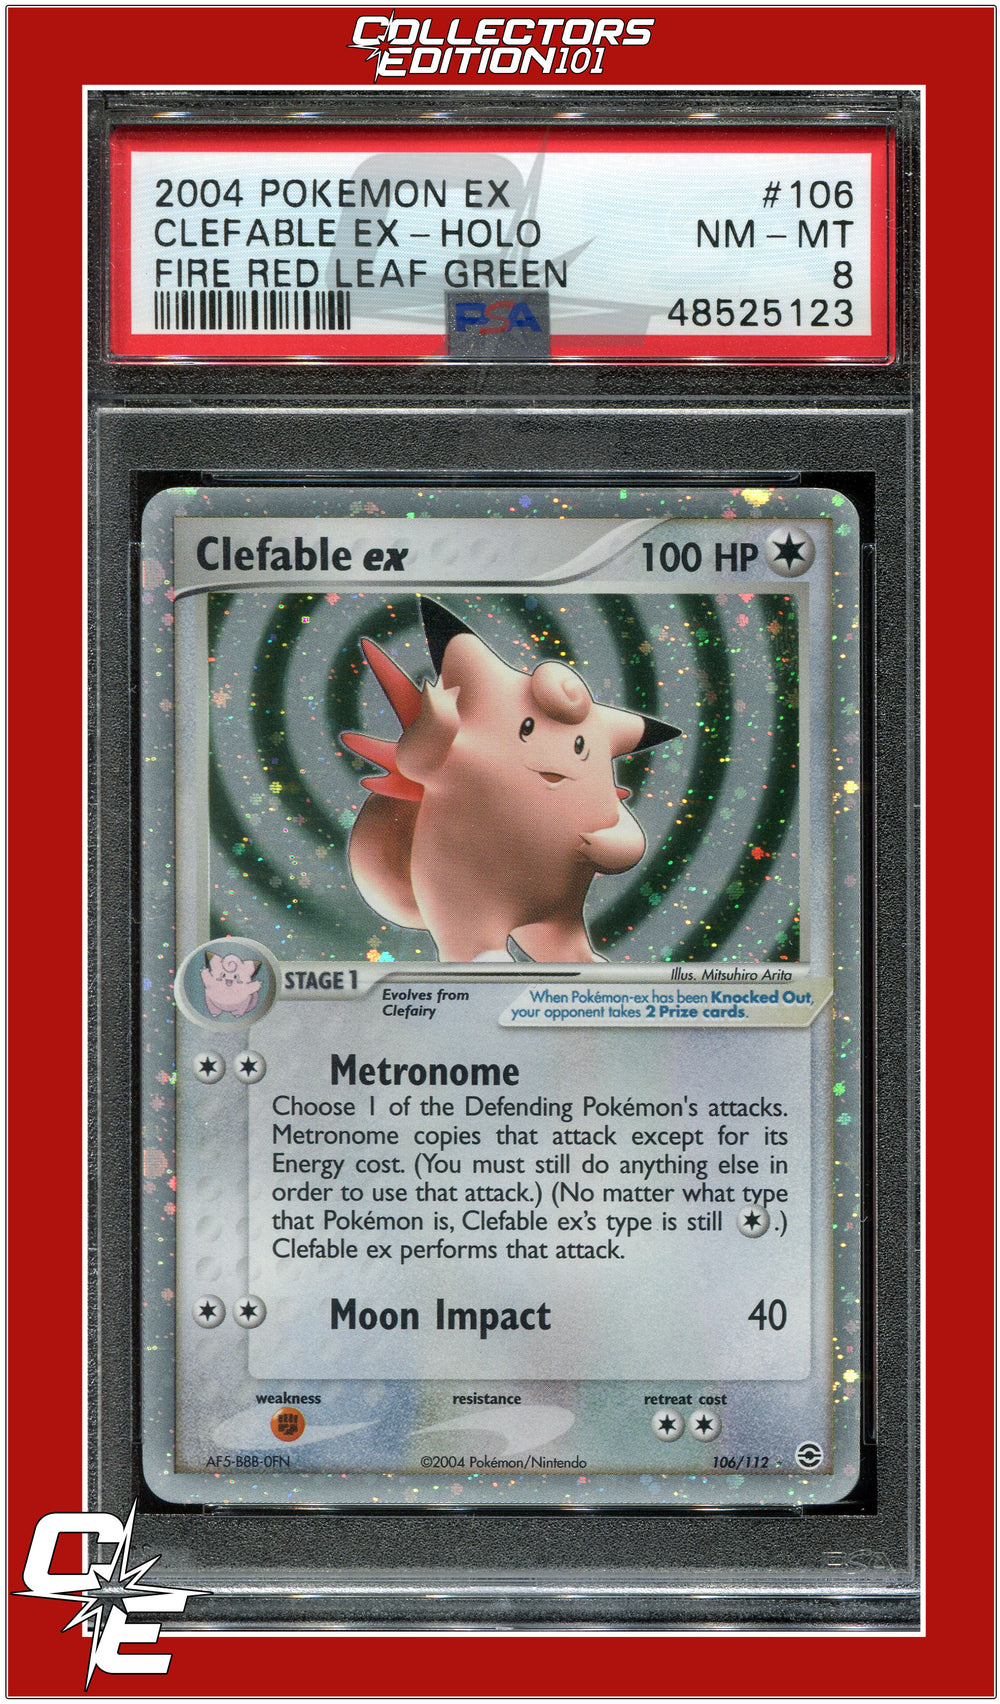 EX FireRed LeafGreen 106 Clefable EX Holo PSA 8